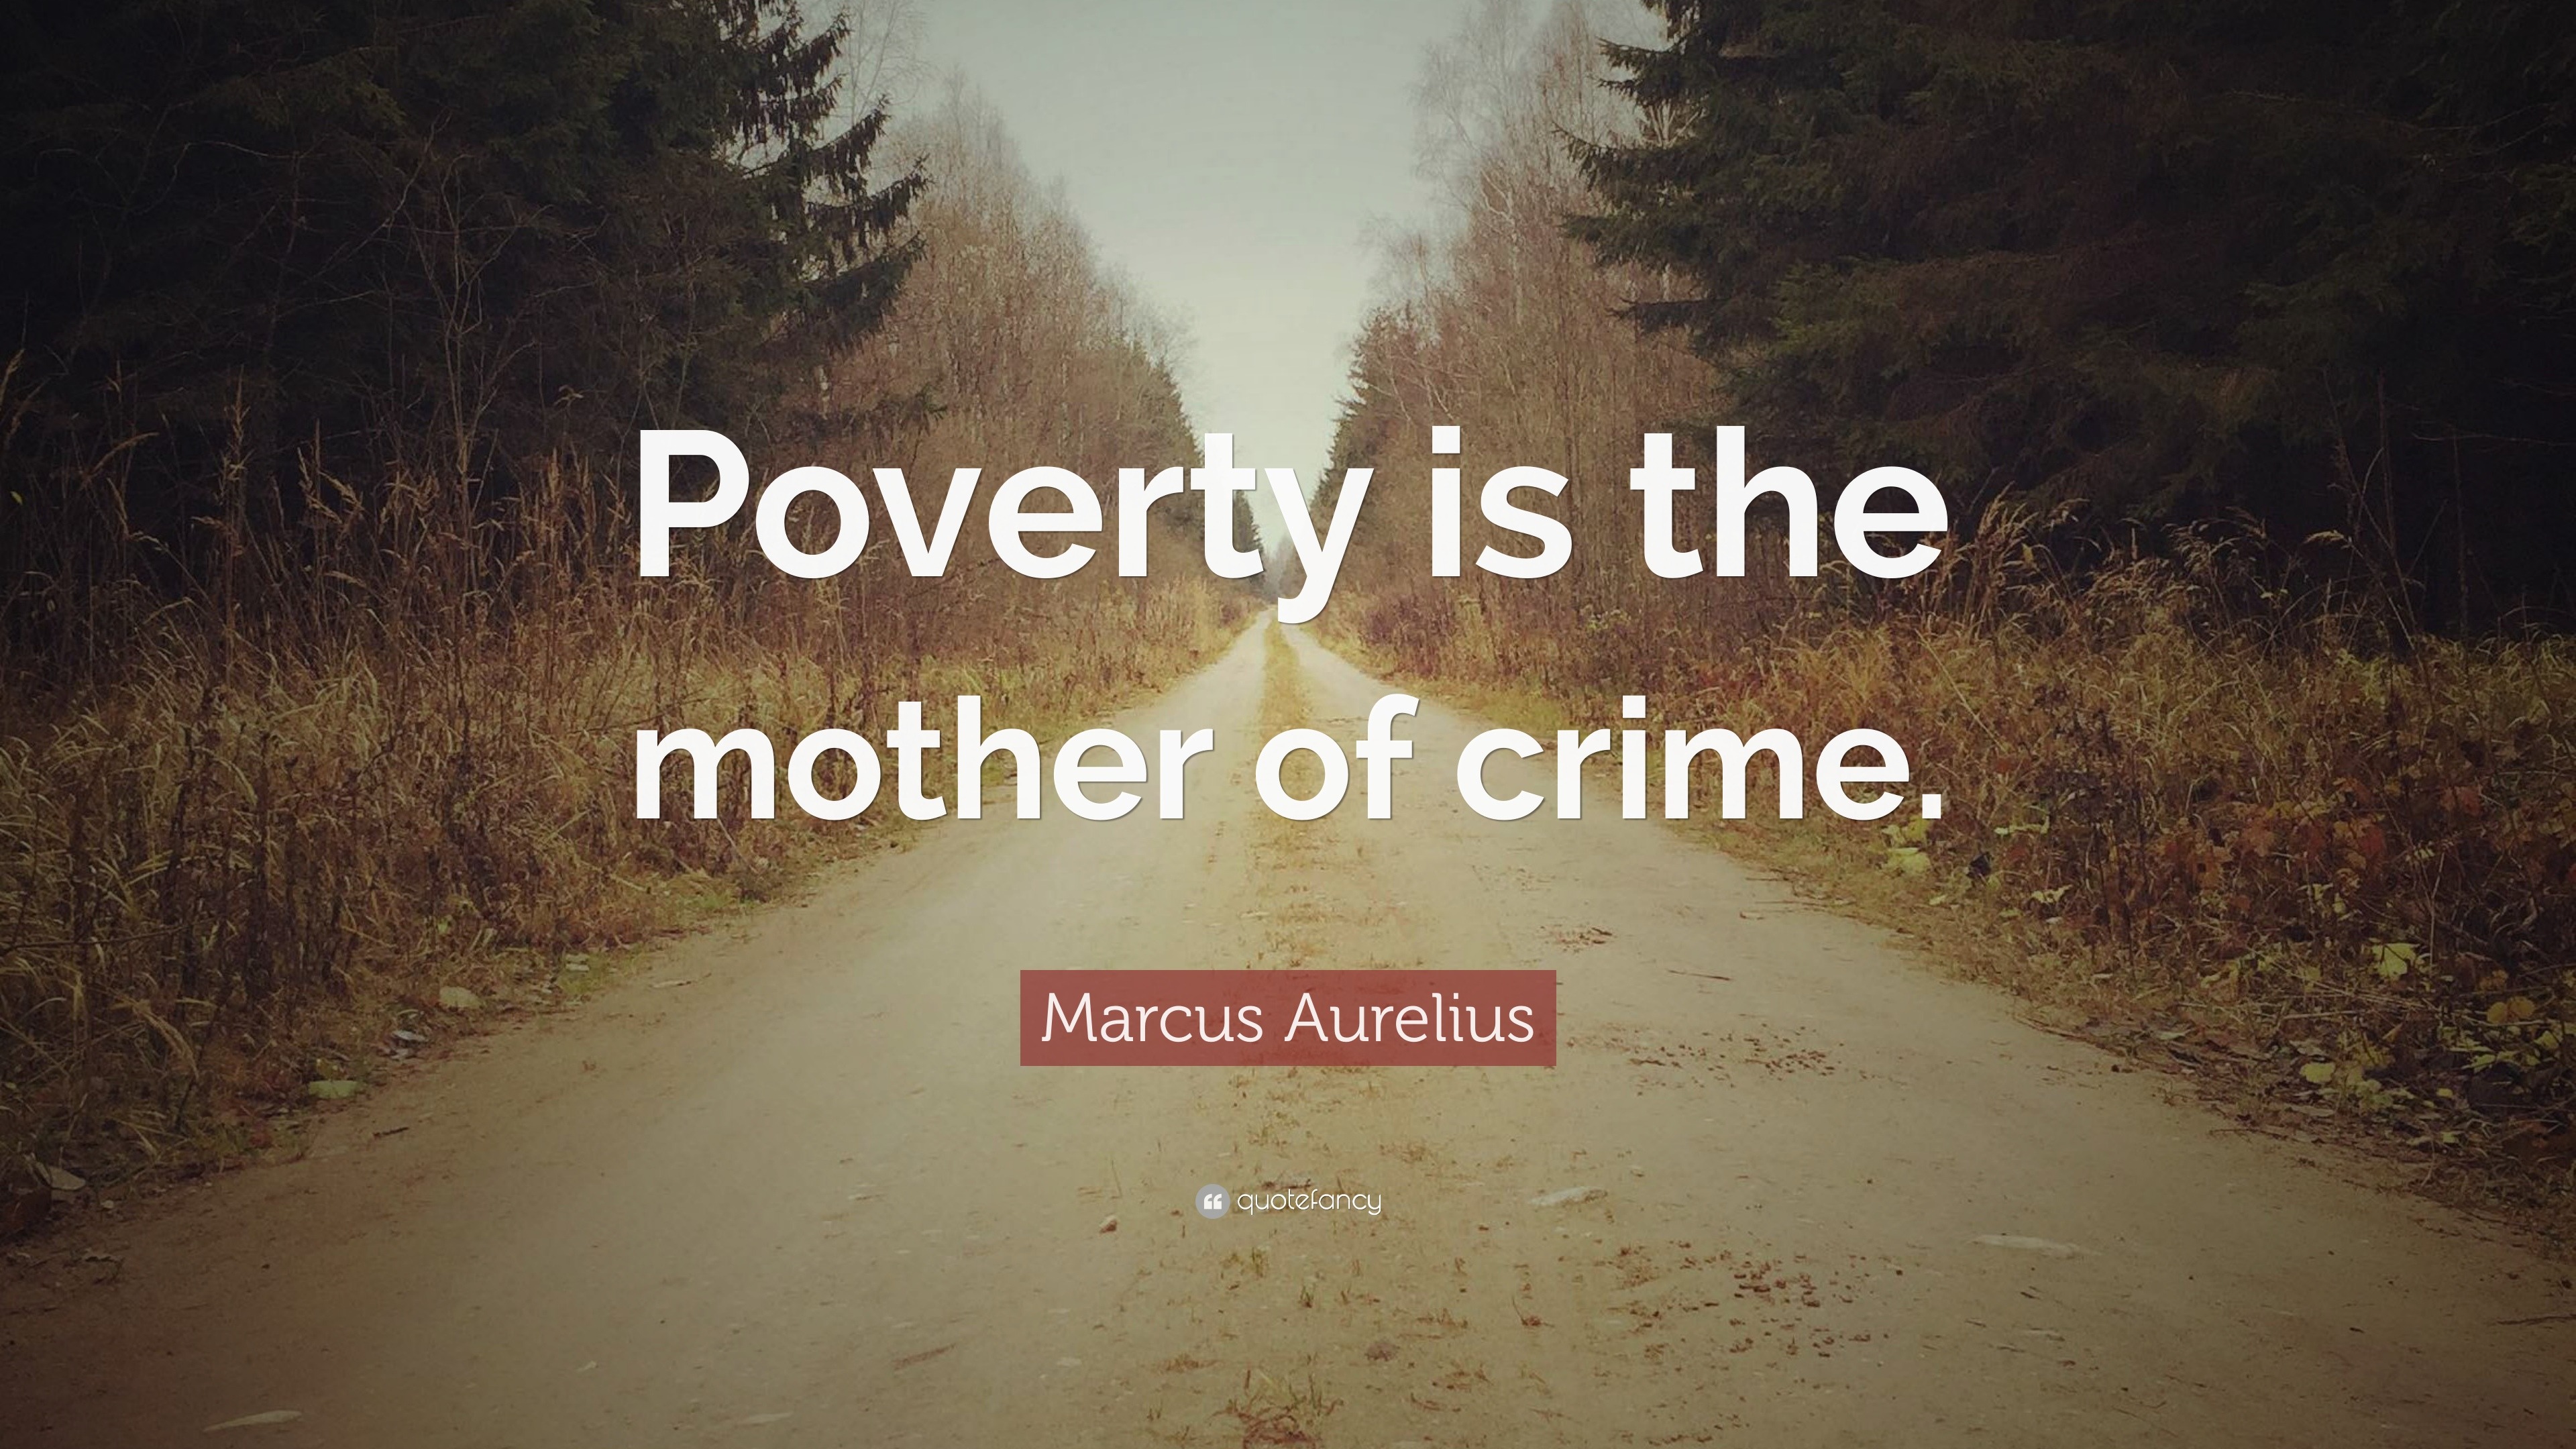 Poverty is the mother of crime